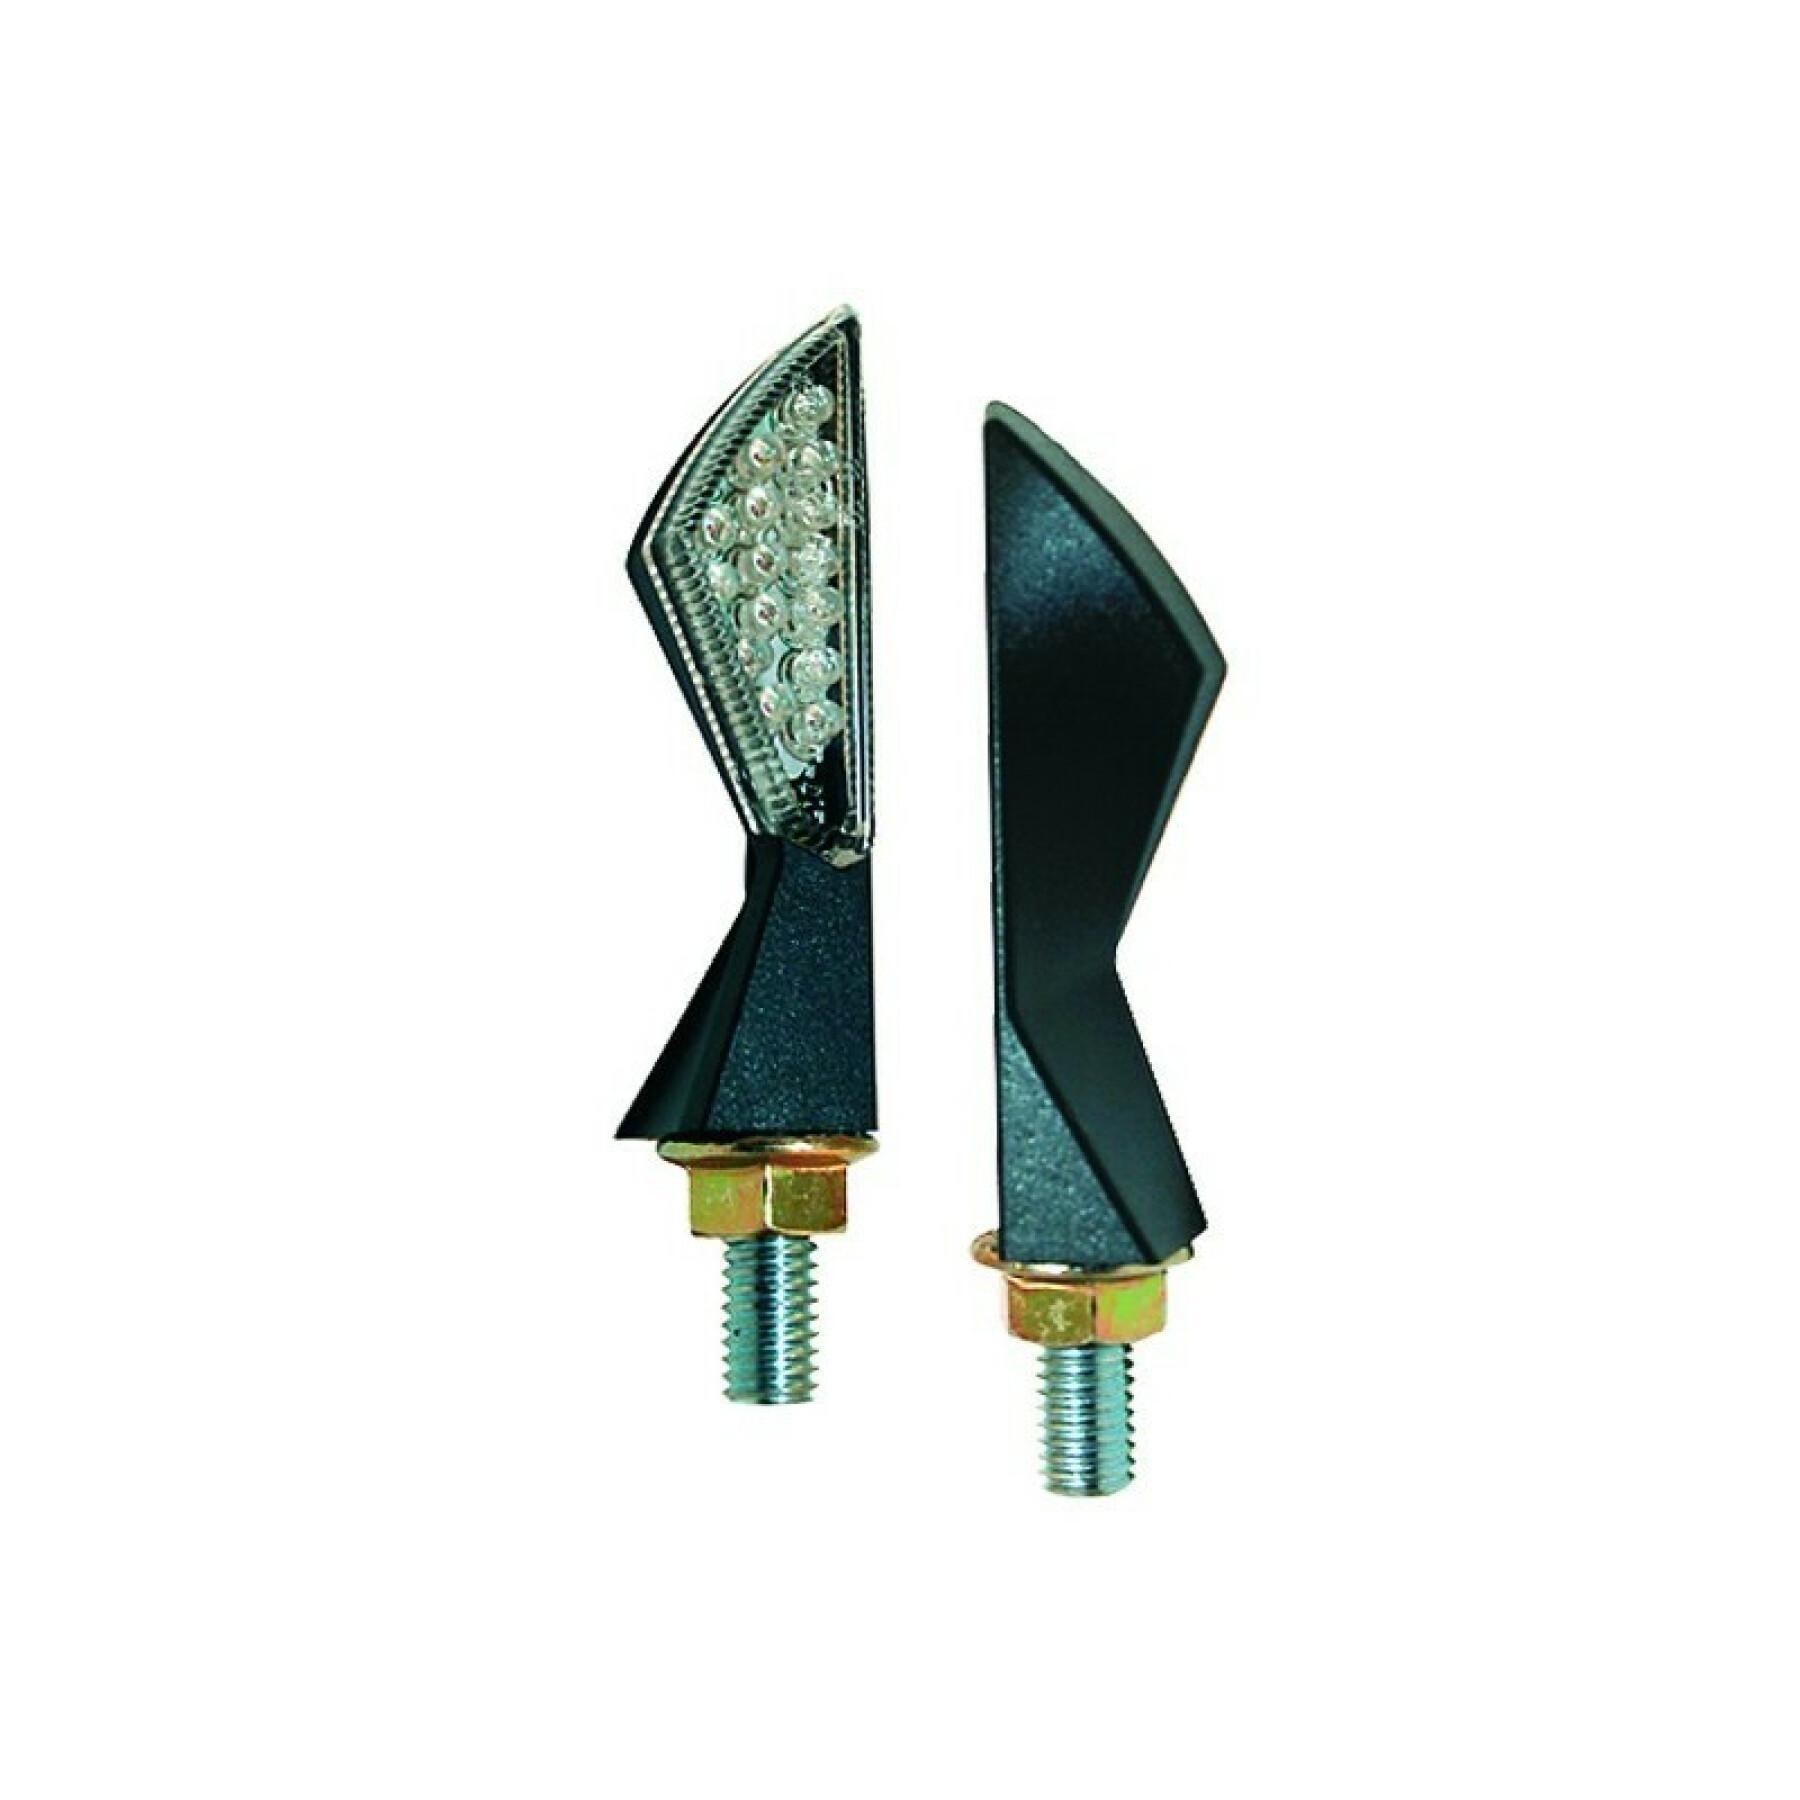 Pair of motorcycle led turn signals Brazoline Twisty